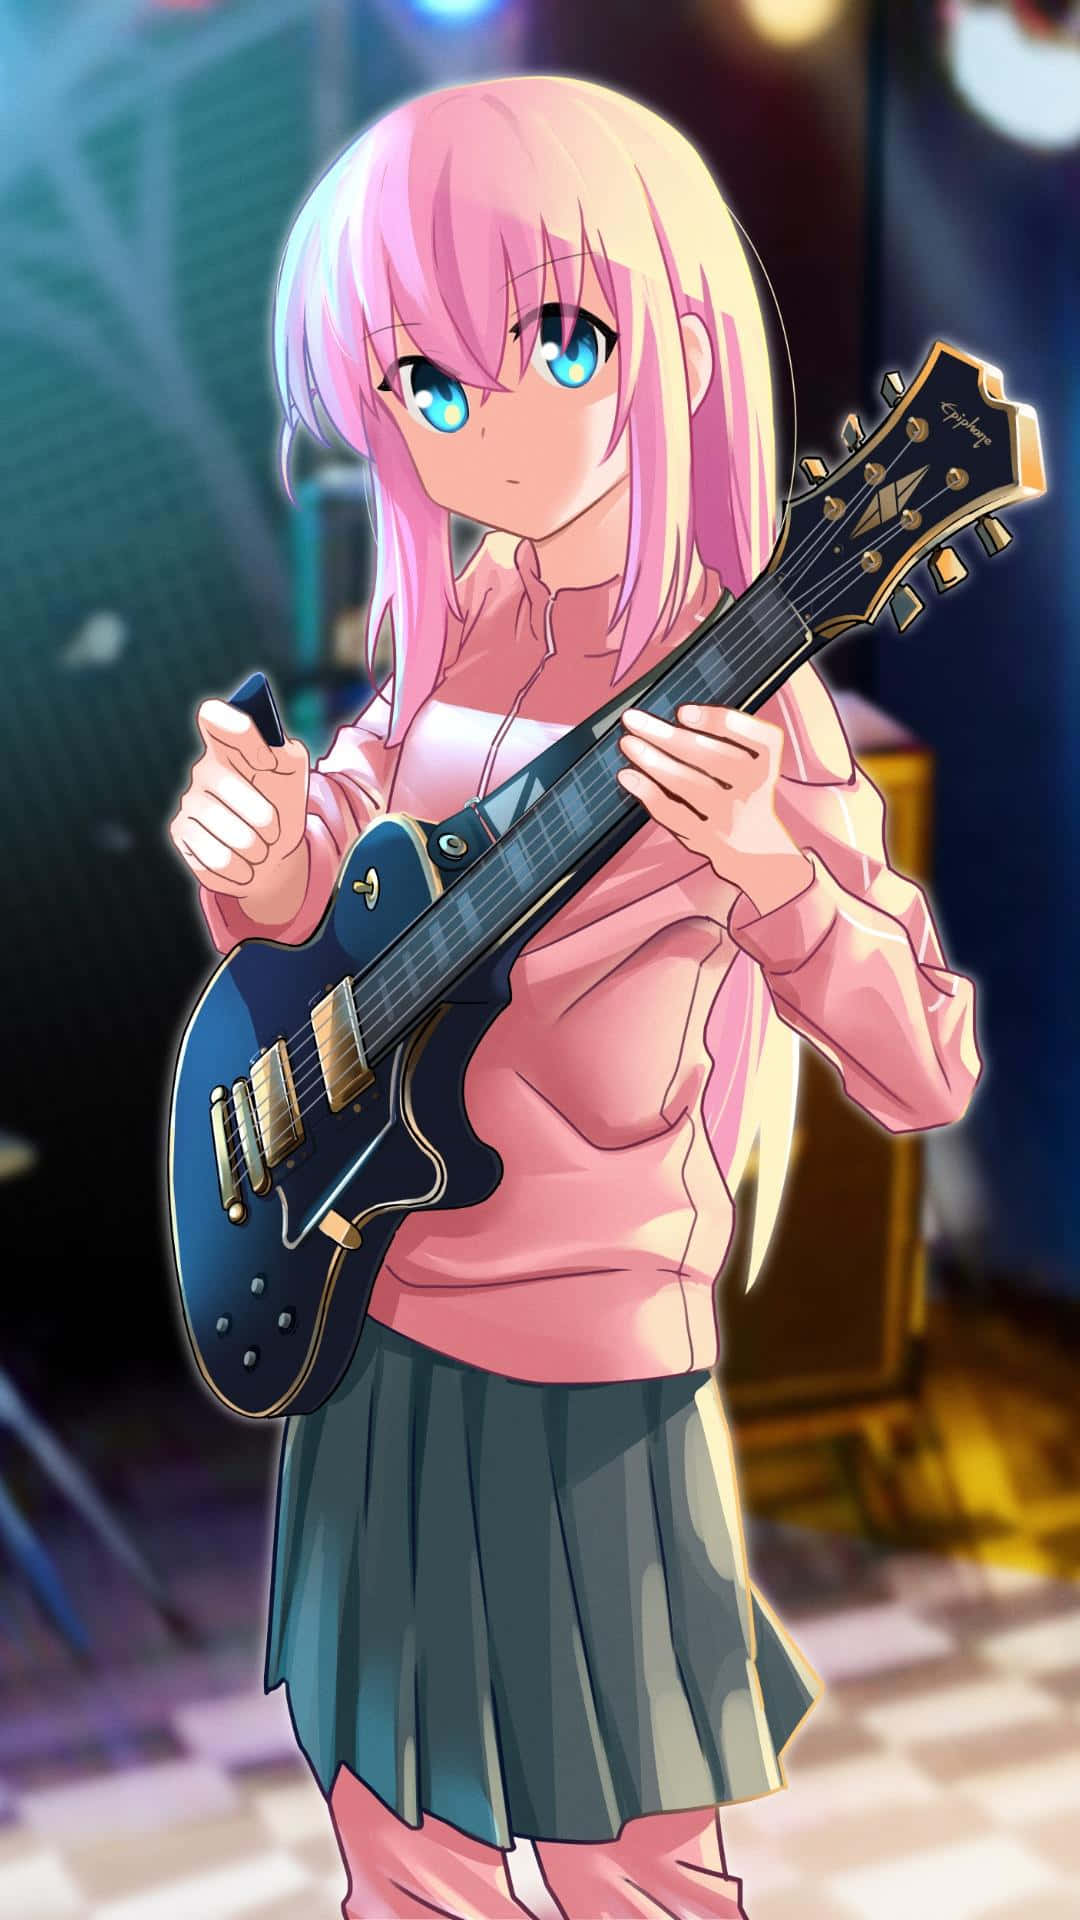 Pink Haired Anime Girl With Guitar Wallpaper